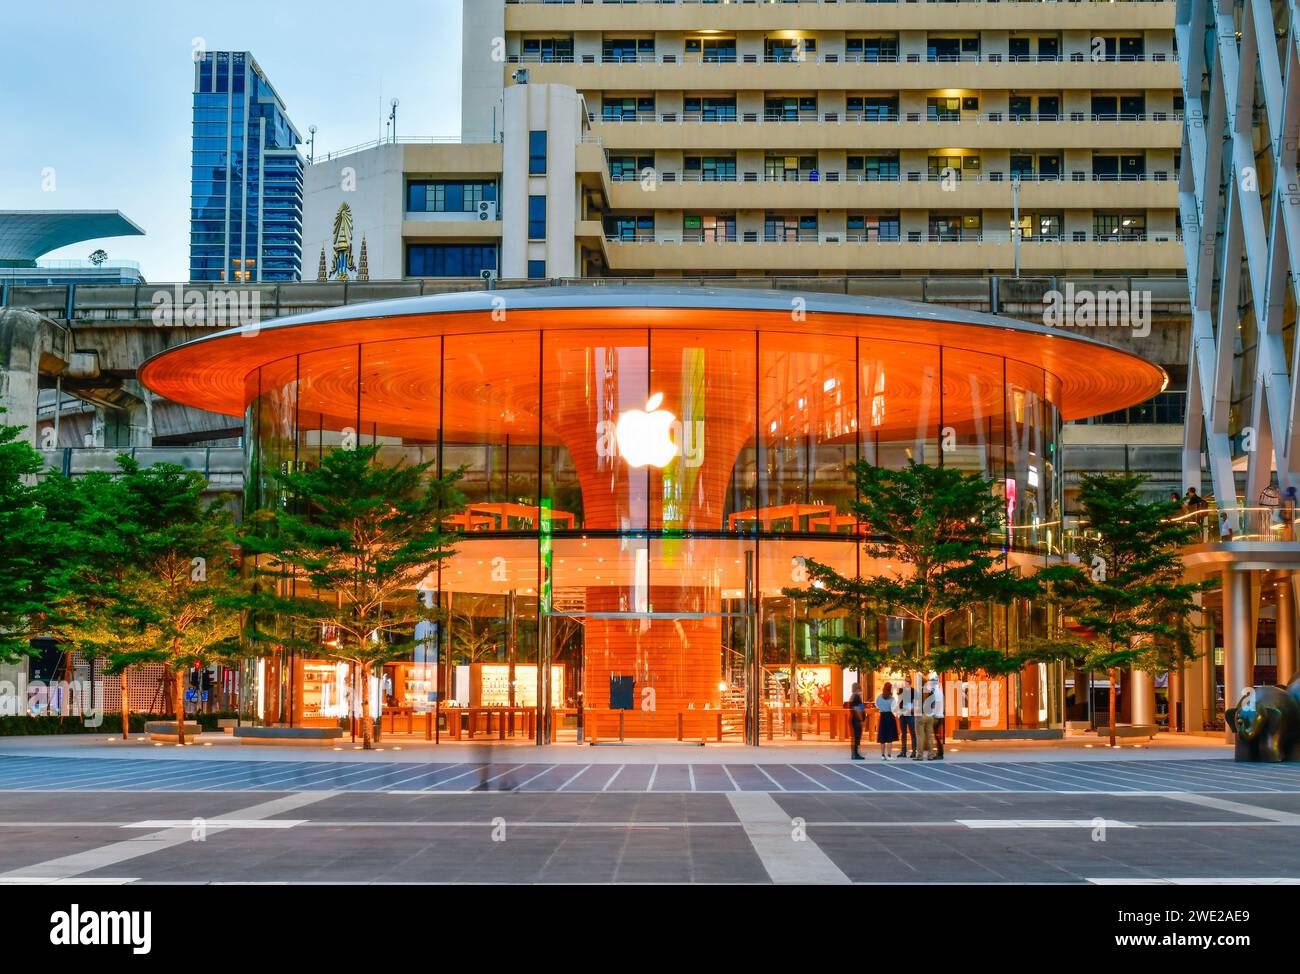 BANGKOK, THAILAND - JULY 28, 2020: Twilight time view new Apple Store building at Central World shopping mall, This is the 2nd Apple Store in Thailand Stock Photo